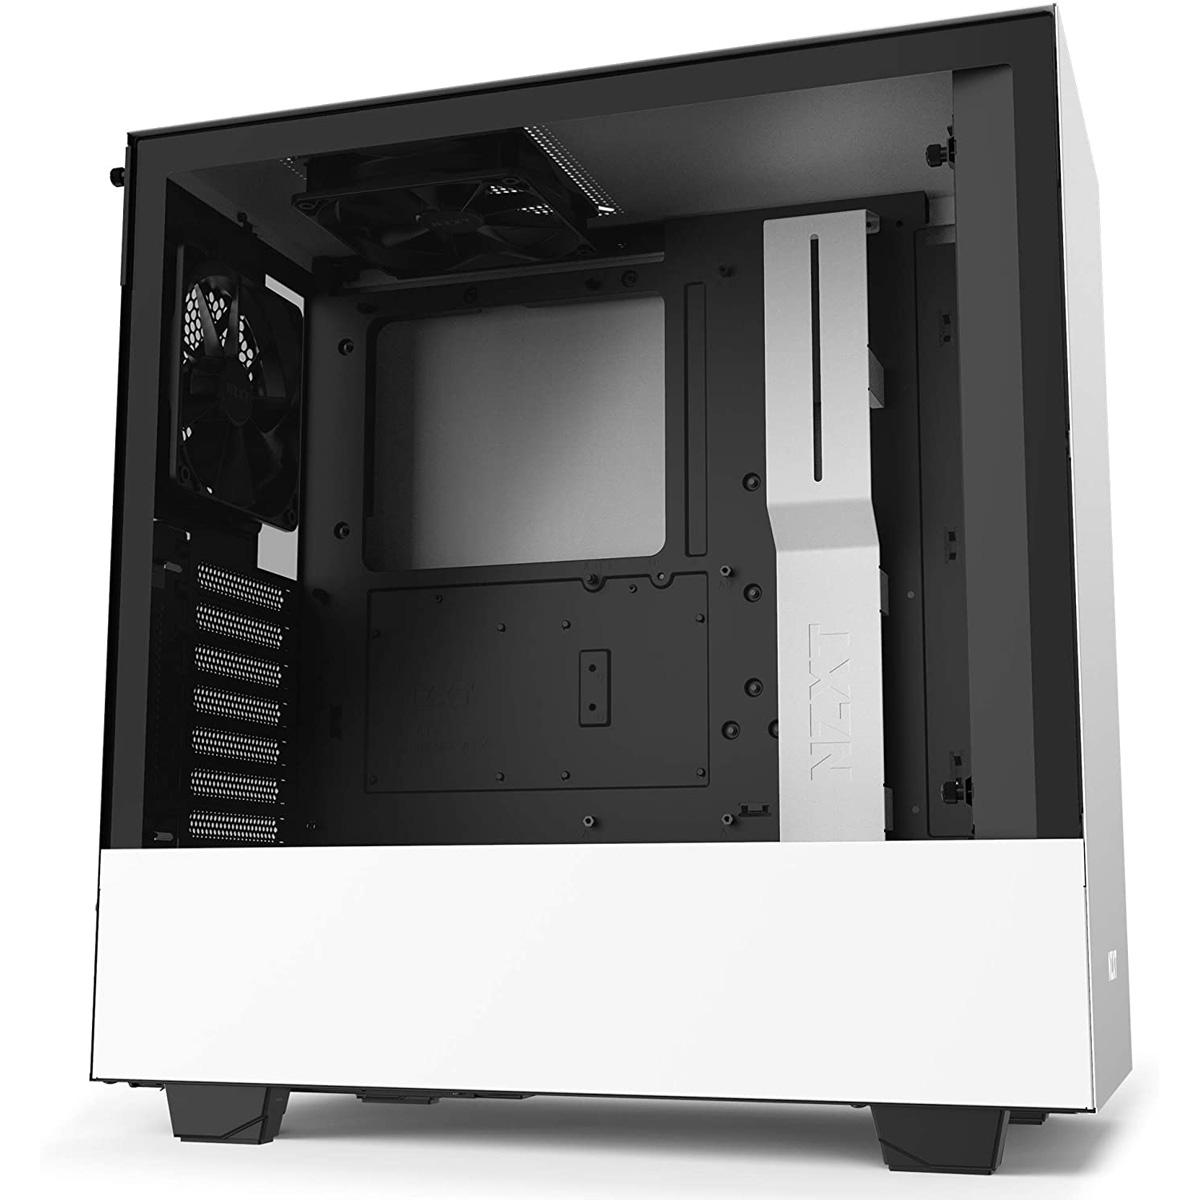 NZXT H510 Compact ATX Mid-Tower PC Gaming Case for $61.99 Shipped